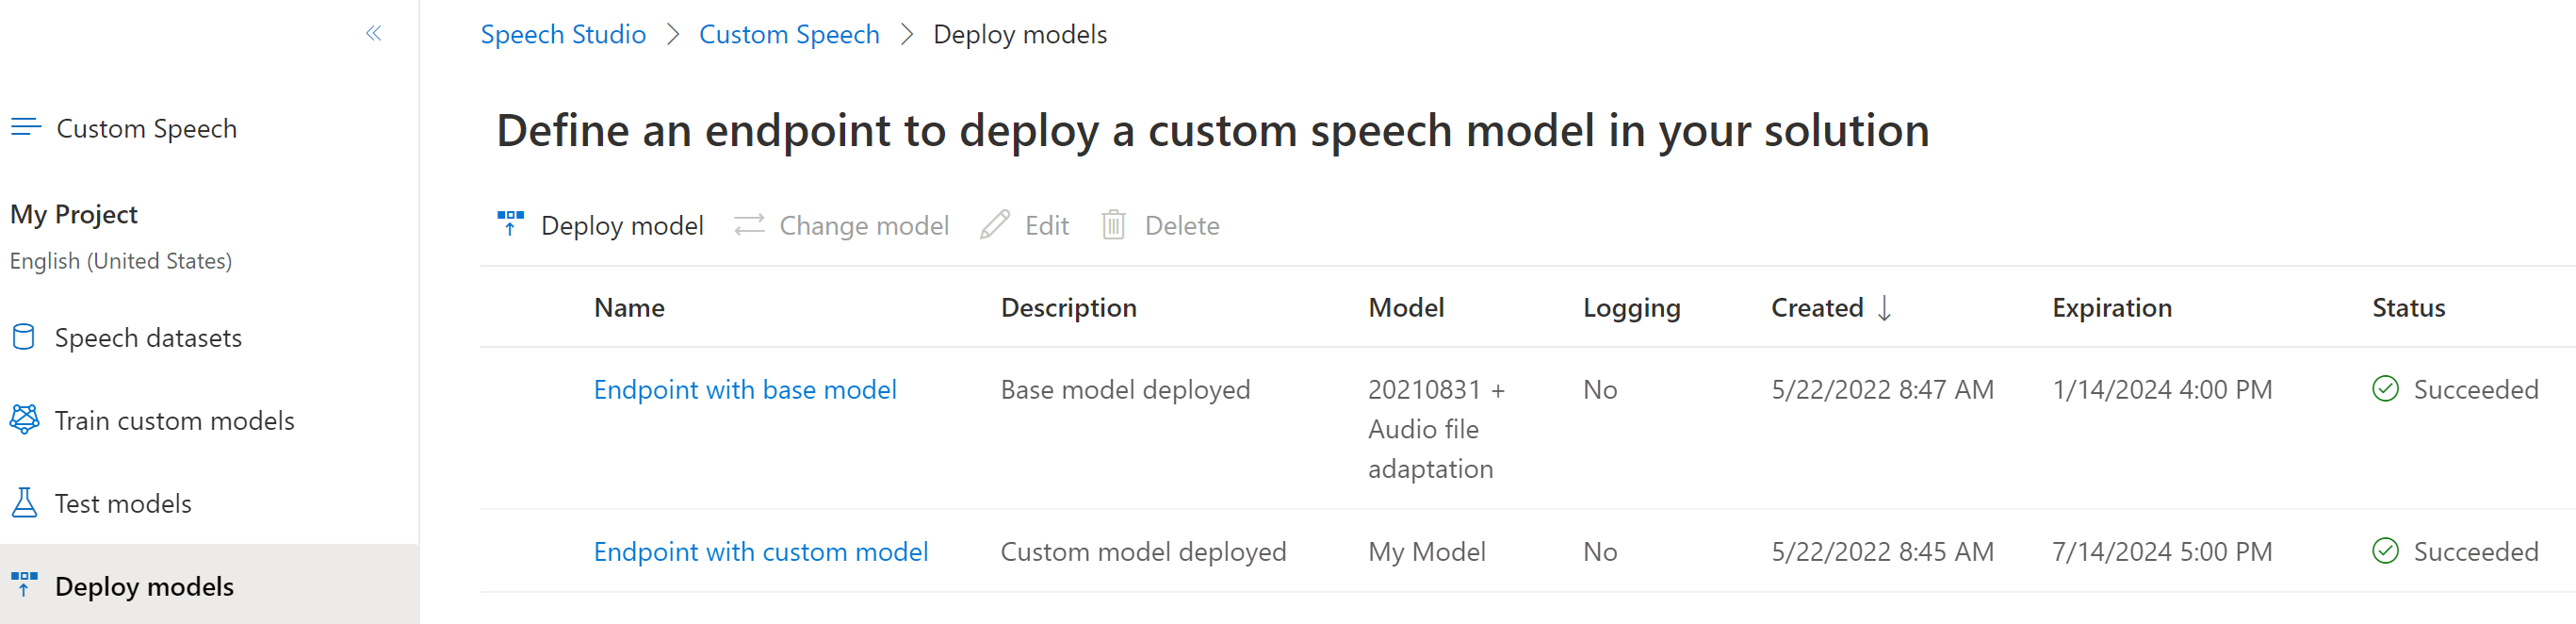 Screenshot of the deploy models page that shows the transcription expiration date.